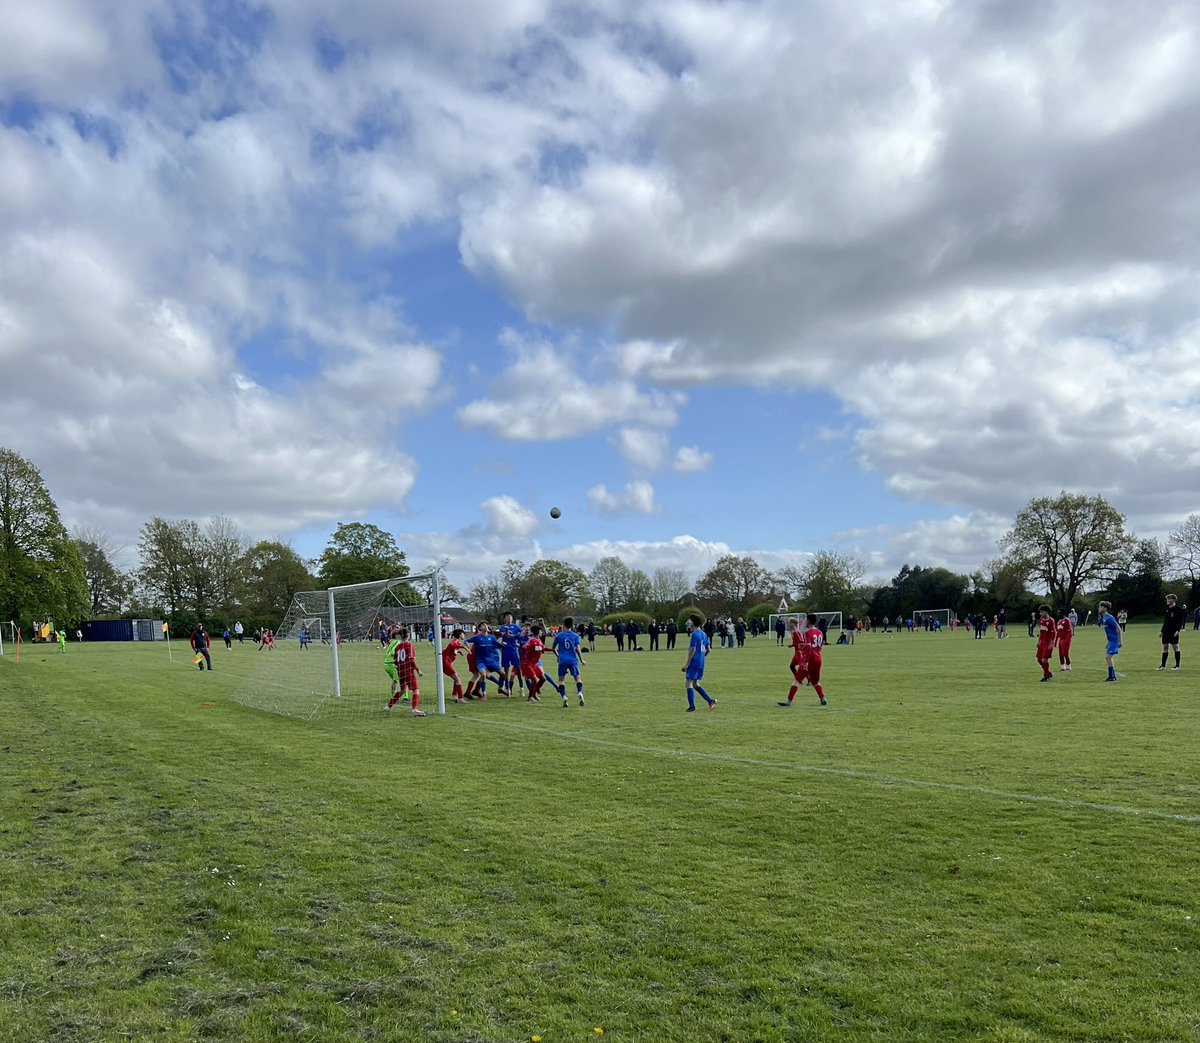 ⚽️ What no rain! At last it's a dry day for James to referee u15s match and then straight onto officiating u11s game @FHMFC1967 Pitch looking gorgeous @FHFC1907 - no mean feat with this year's weather. @EnglandFootball @FA